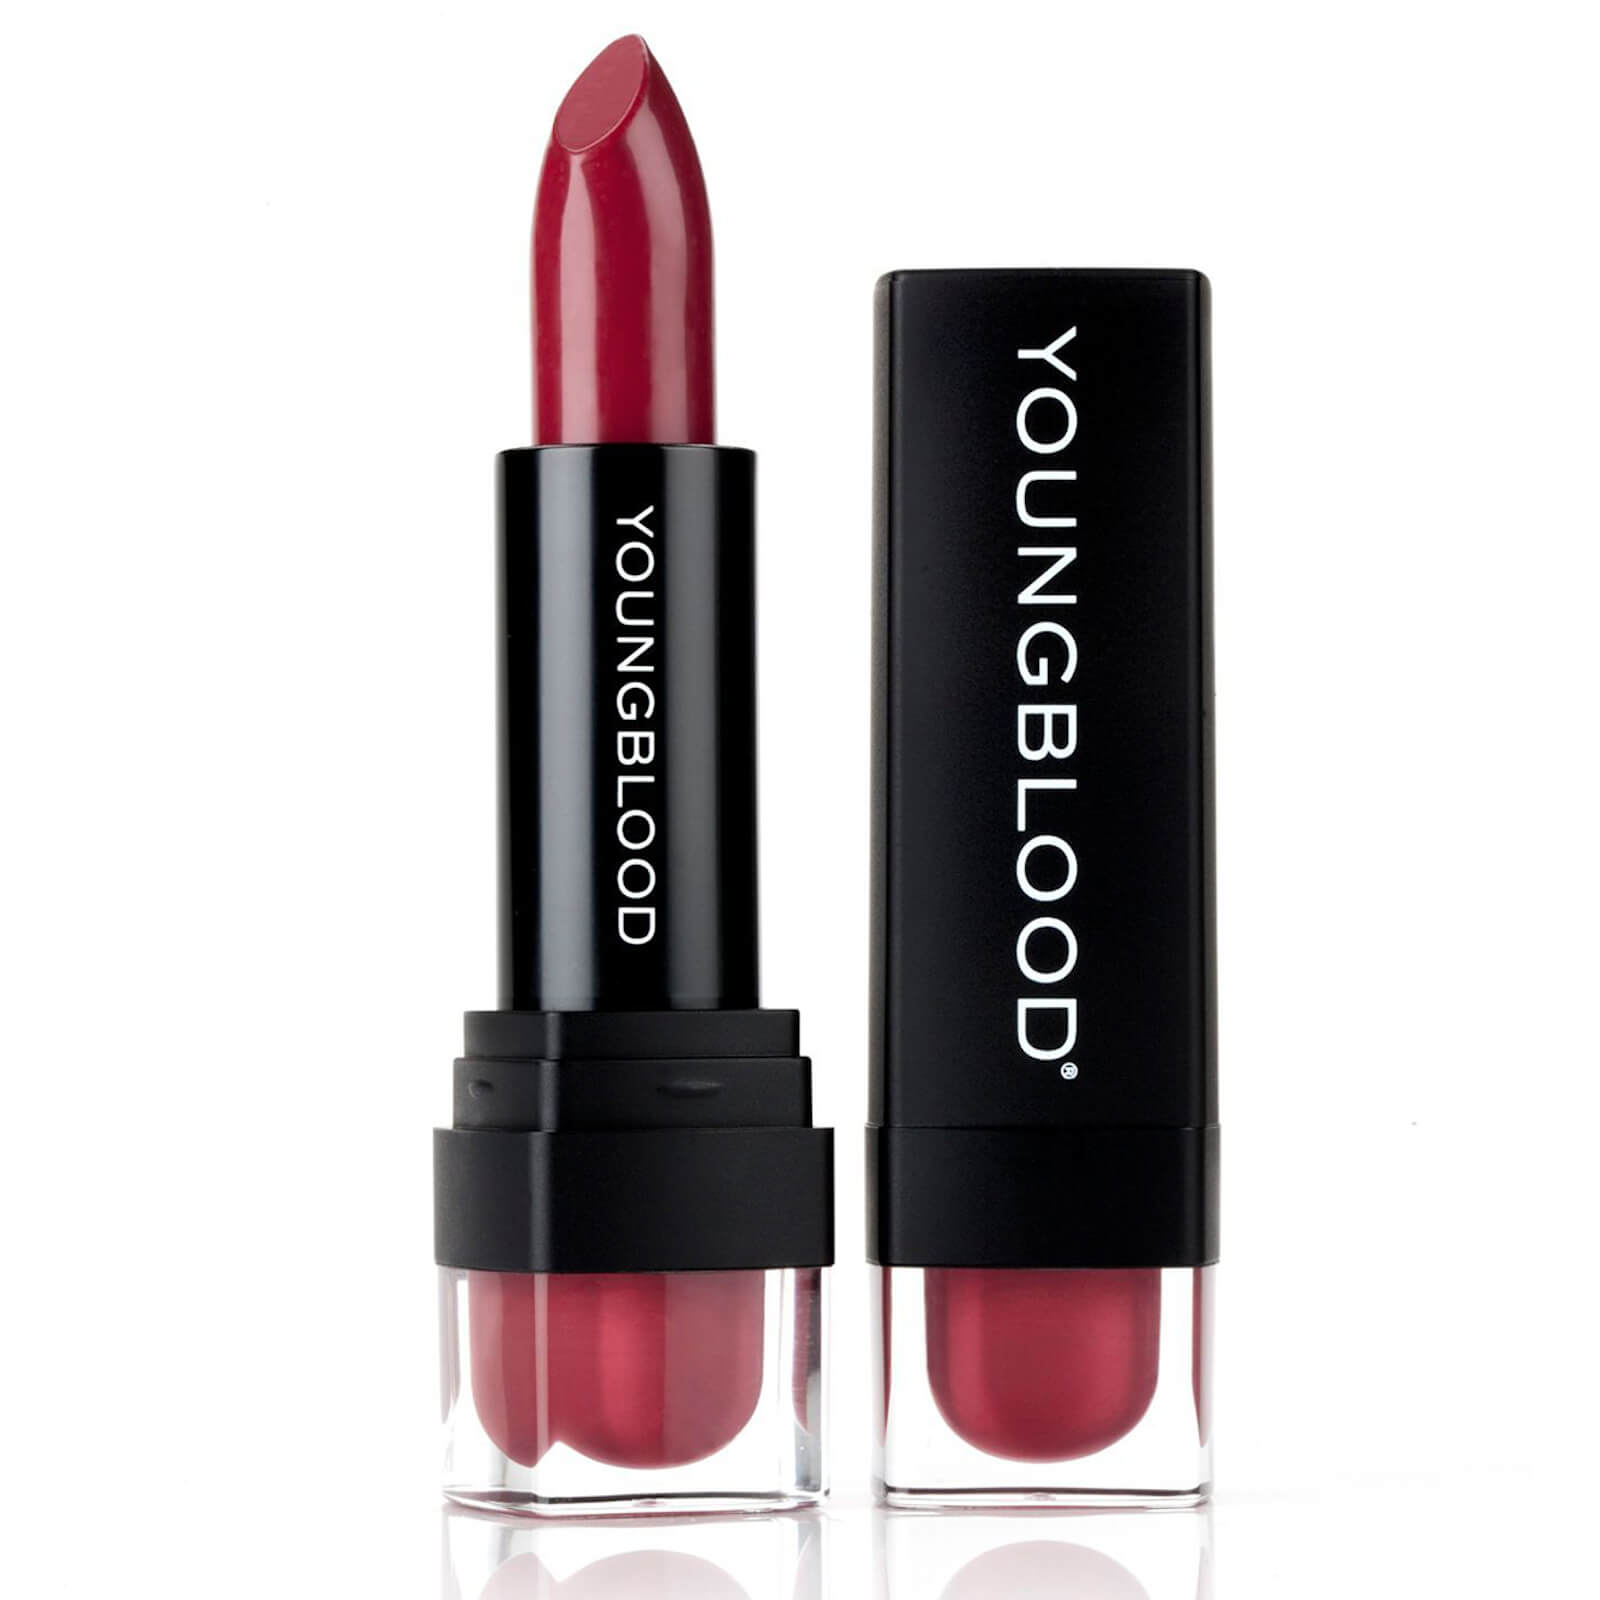 Youngblood Mineral Cosmetics Youngblood Mineral Crème Lipstick 4g (Various Shades) - Kranberry